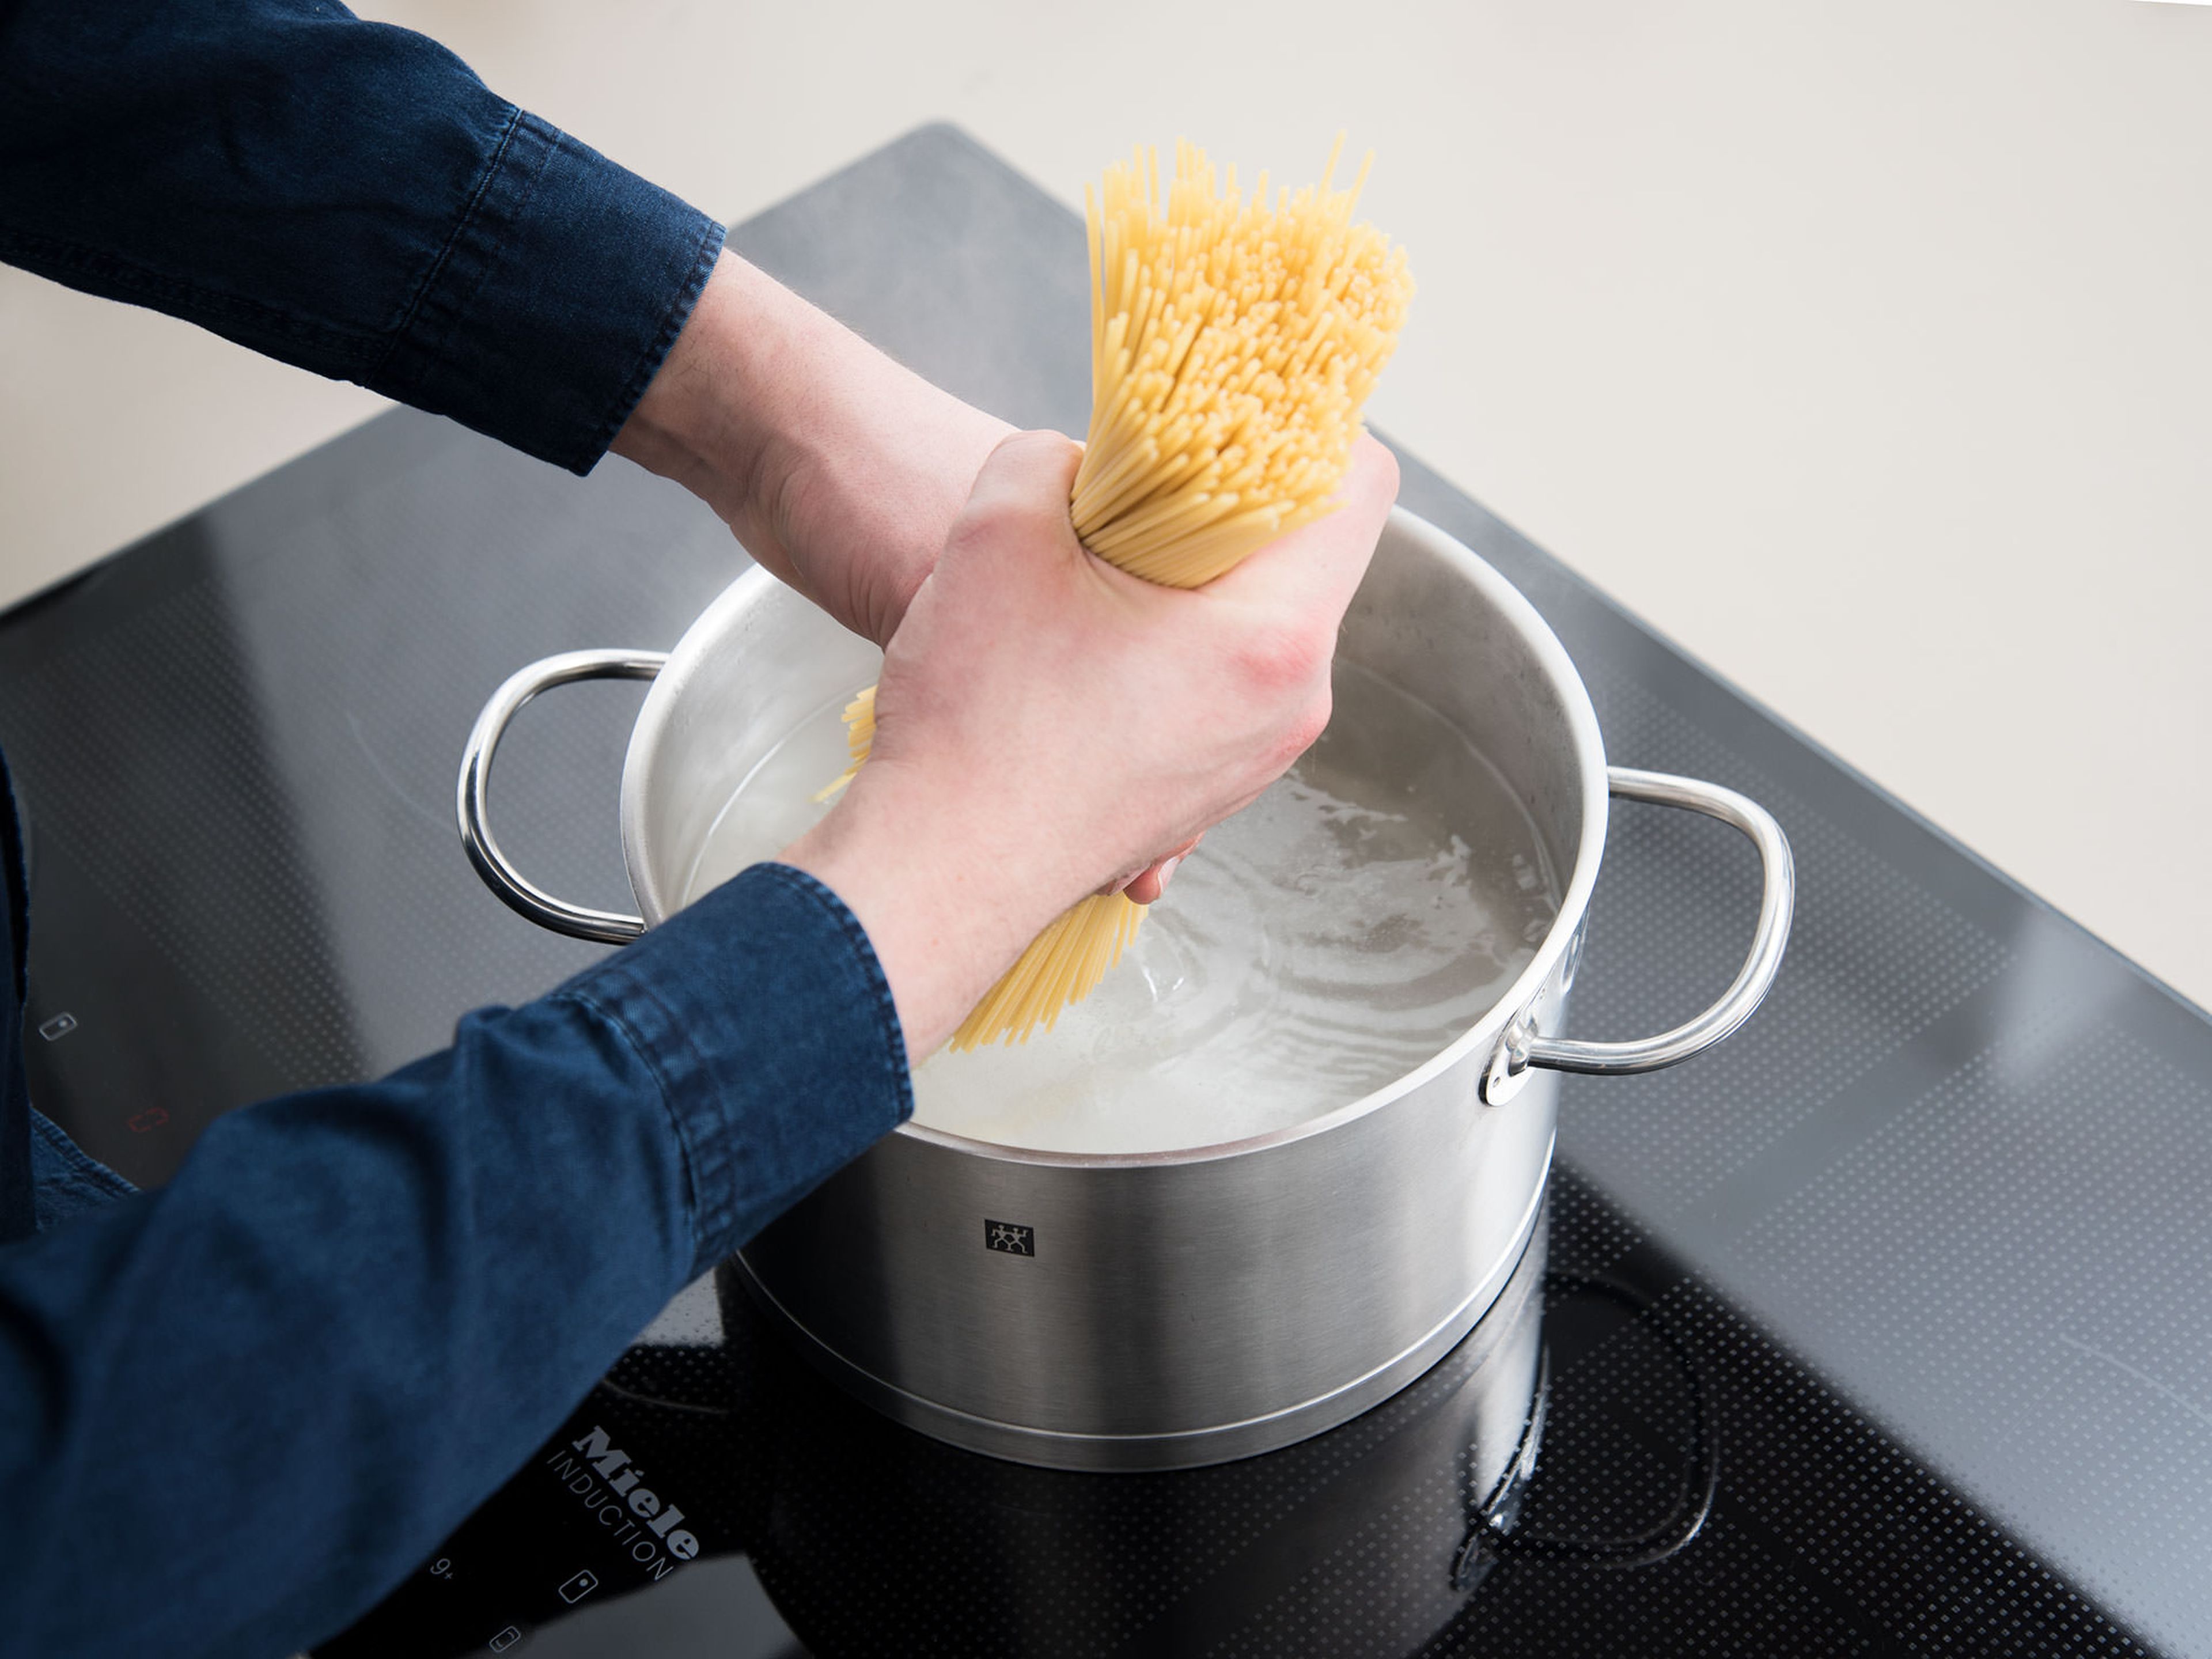 Cook the spaghetti until al dente according to package instructions, then transfer to a colander to strain.